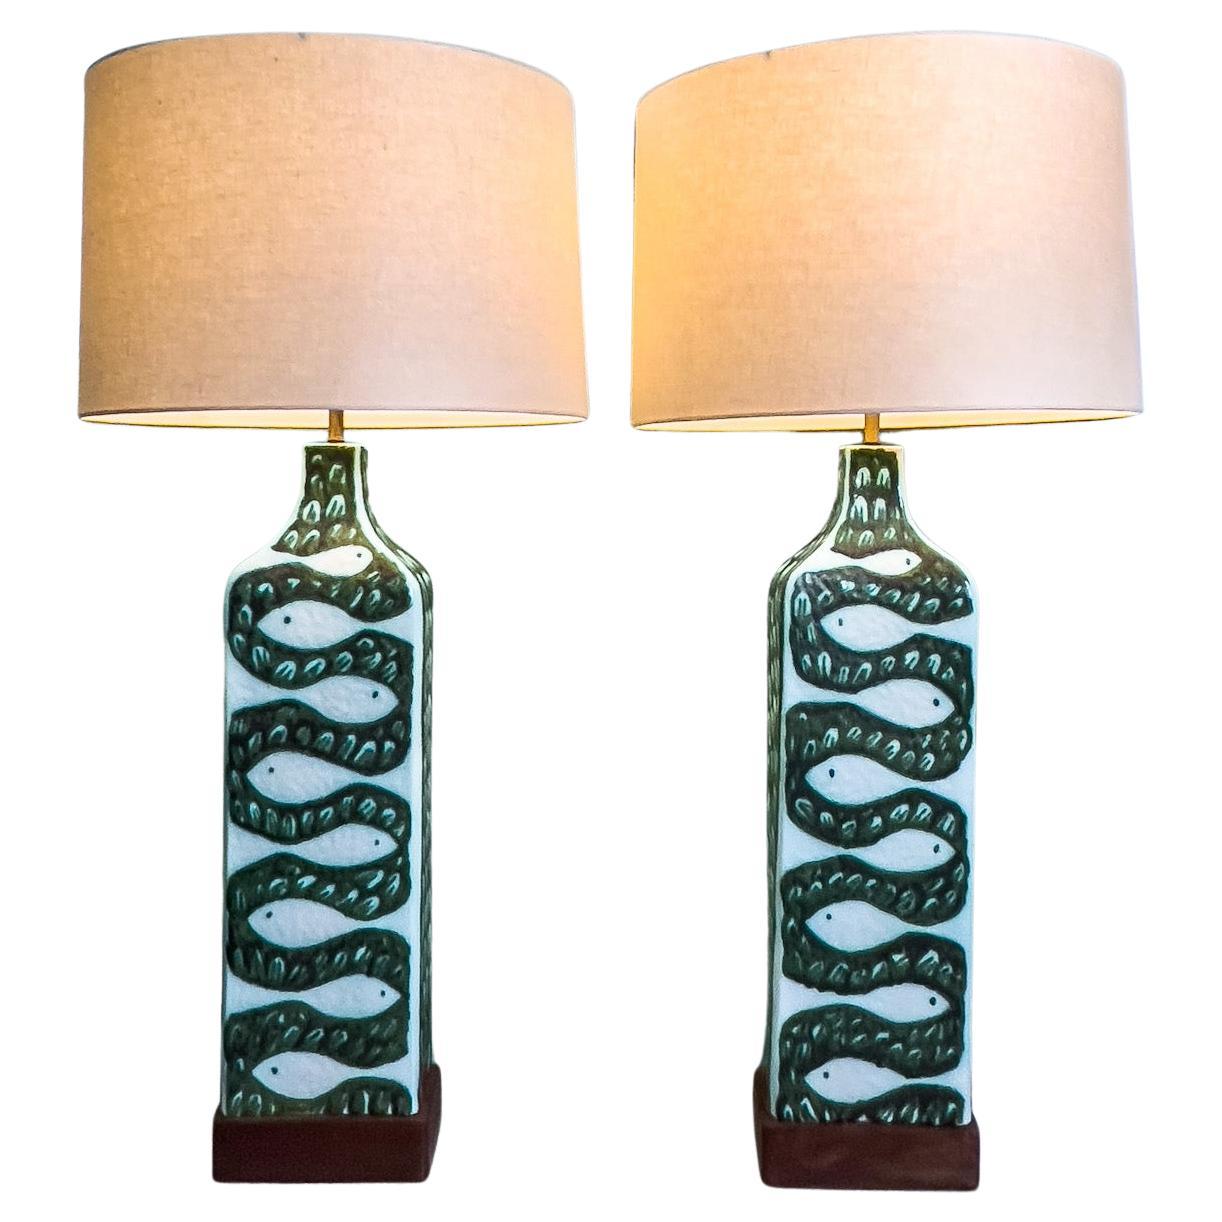 Large Pair of Ceramic Lamps by Alessio Tasca for Raymor For Sale